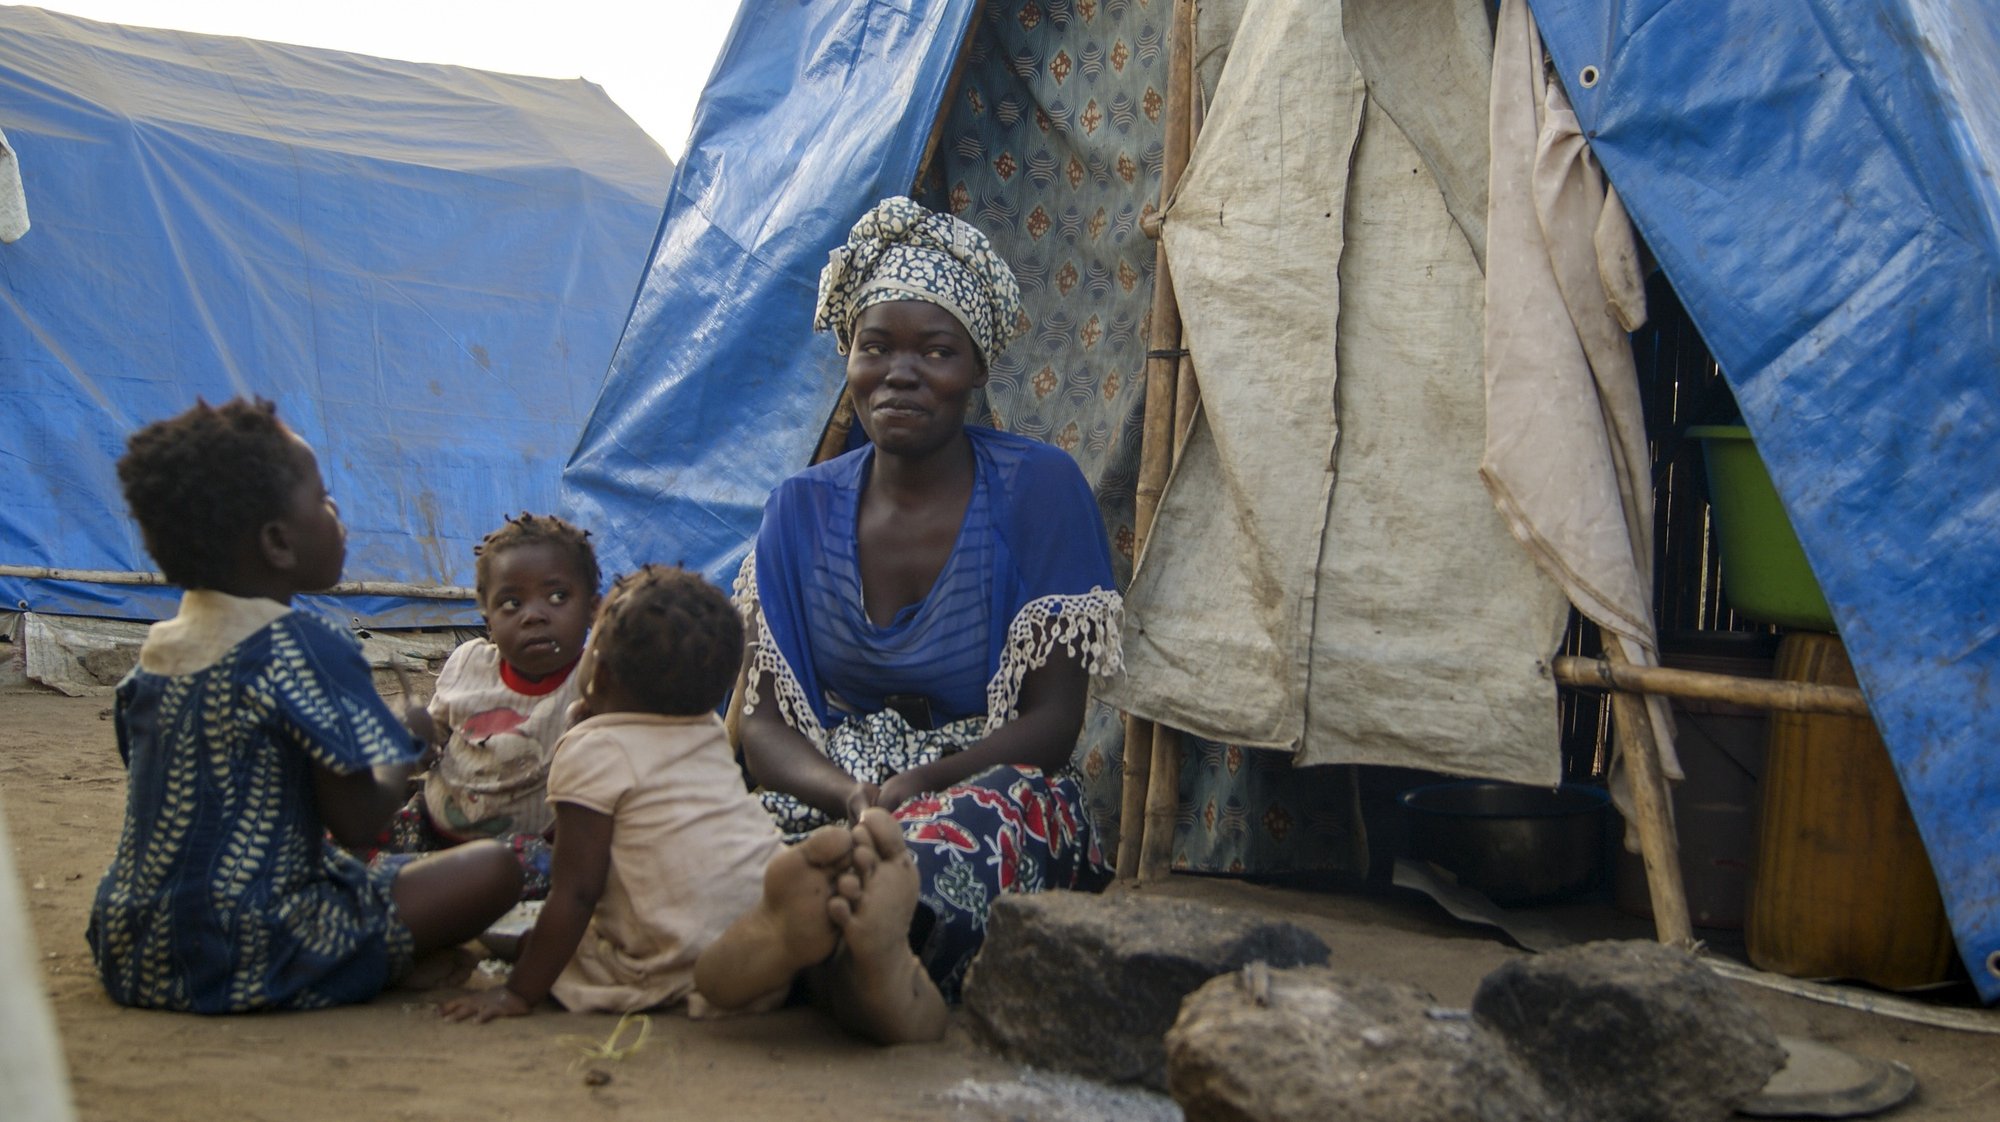 A woman and children in one of the shelter camps in Metuge, a space housing displaced people fleeing armed violence in northern Mozambique. Cabo Delgado, Mozambique, 16 August 2021 (issue on 17 August 2021). Following the attacks, which have terrorized Cabo Delgado province since 2017, there are more than 3,100 deaths, according to the ACLED conflict registration project, and more than 817,000 displaced people, according to Mozambican authorities. LUISA NHANTUMBO/LUSA